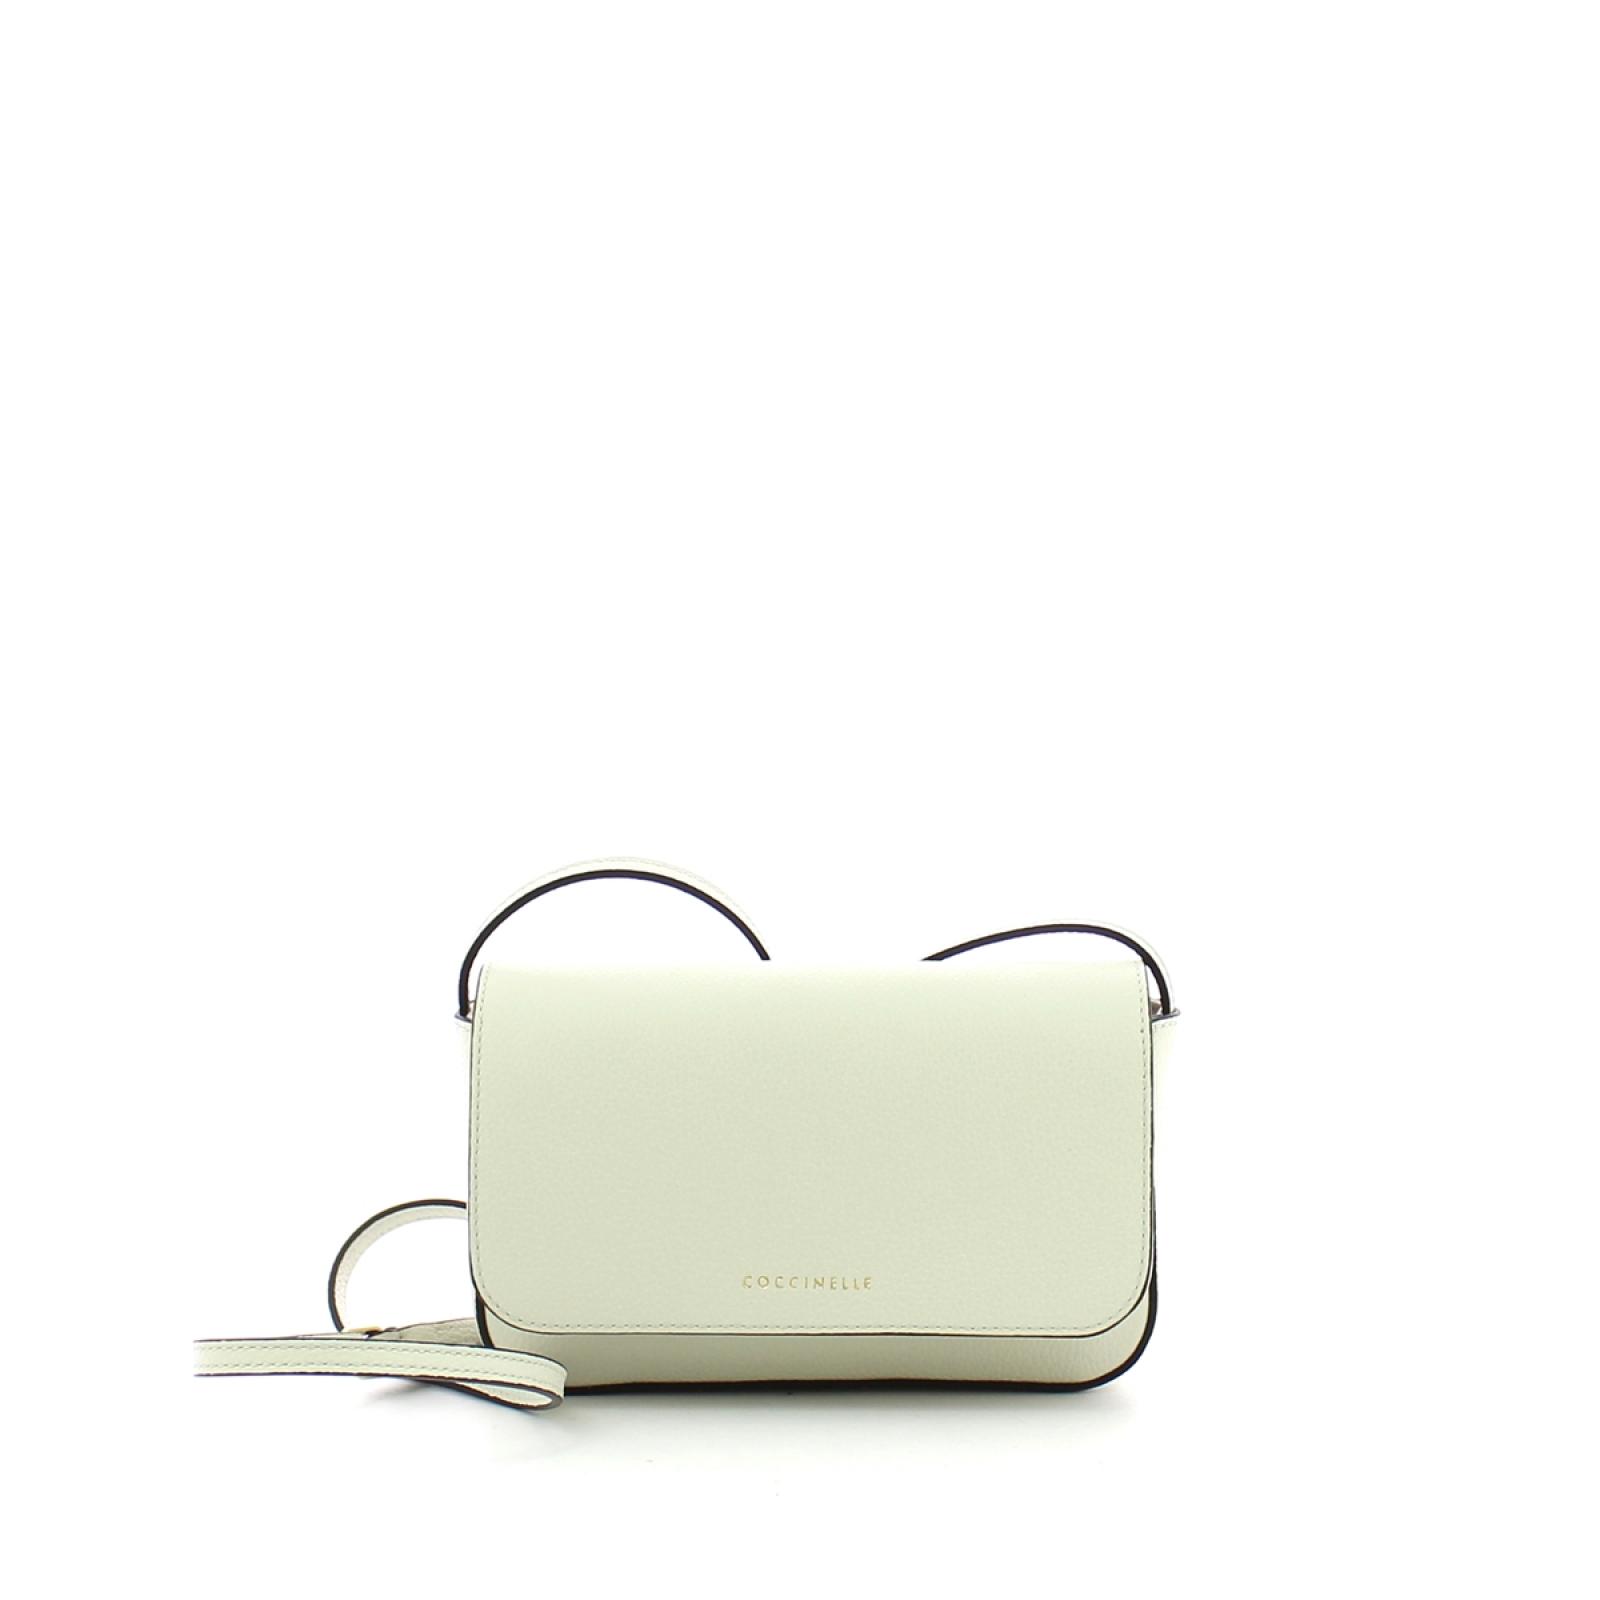 Coccinelle Minibag Annetta in Tumbled Leather - 1